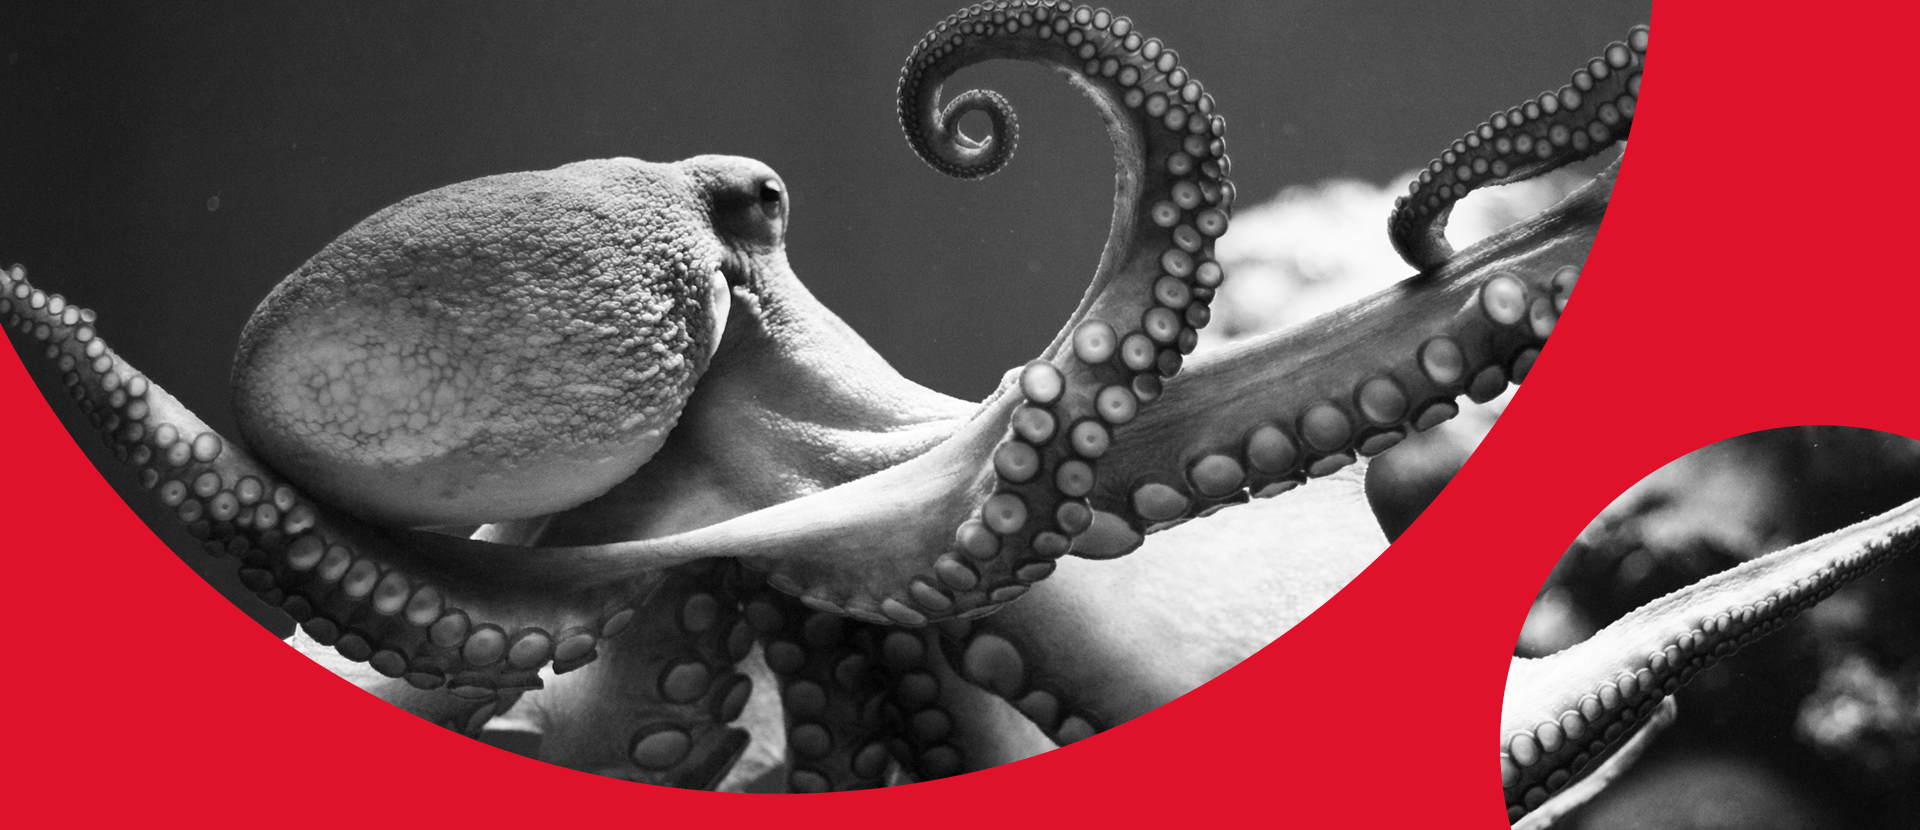 octopus-red_1920x830